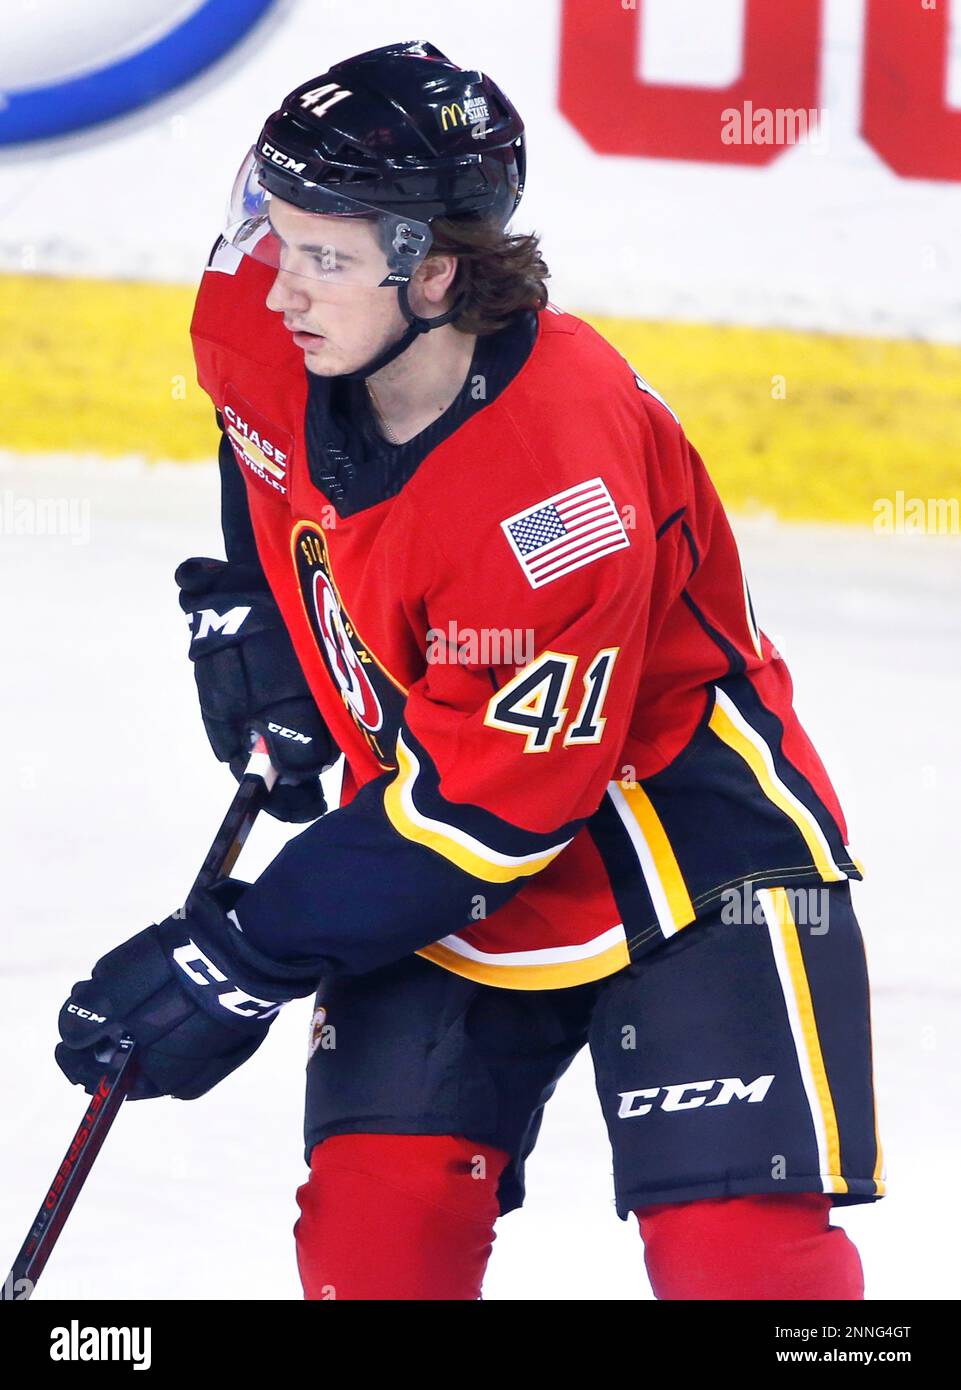 AHL (American Hockey League) profile photo on Stockton Heat player Rory Kerins during a game against the Belleville Senators in Calgary, Ab